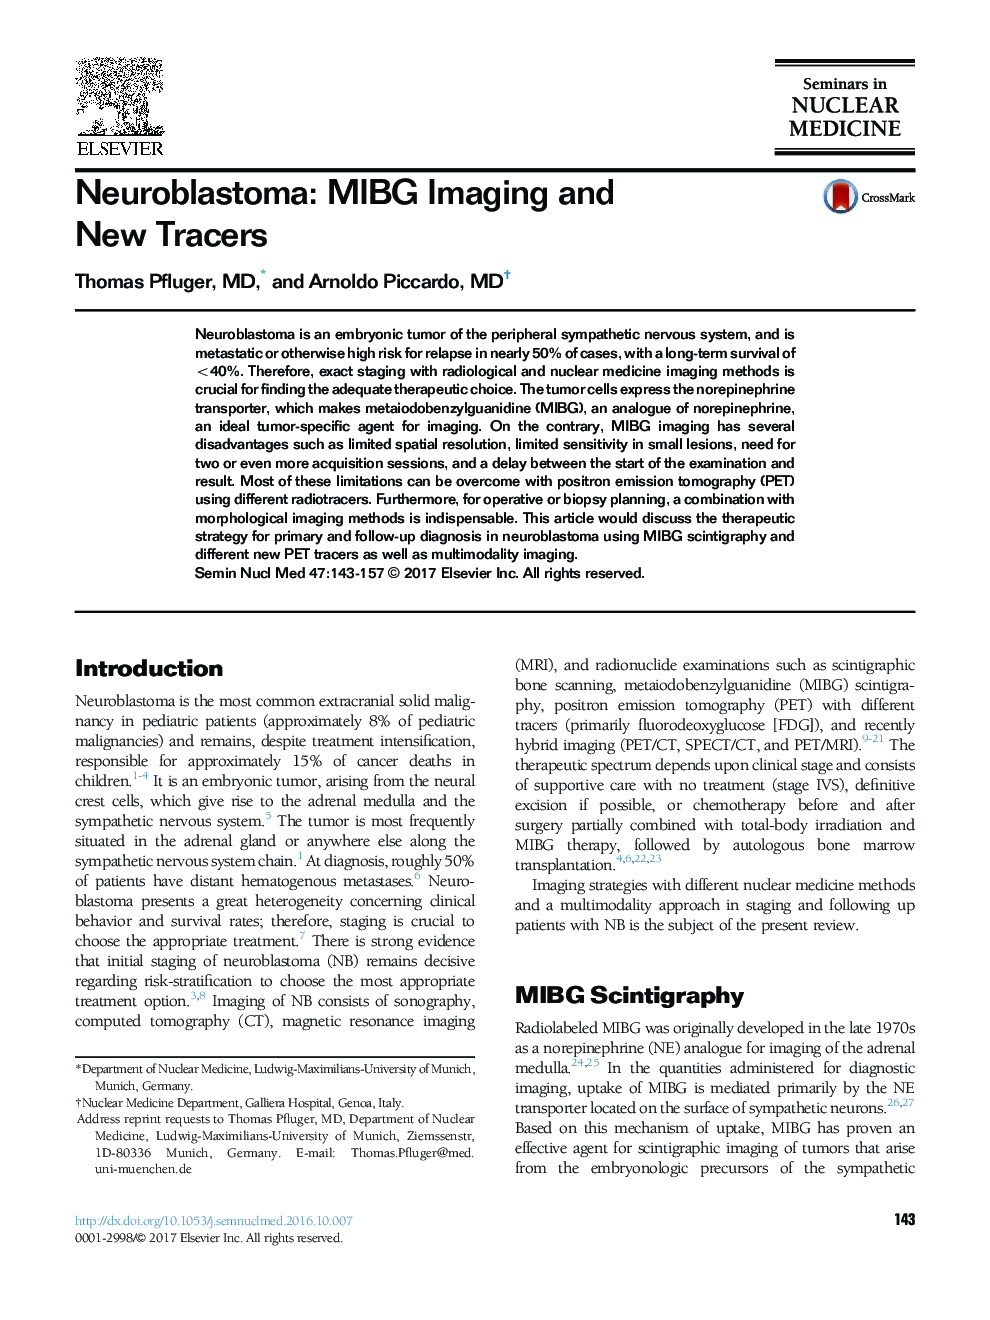 Neuroblastoma: MIBG Imaging and New Tracers